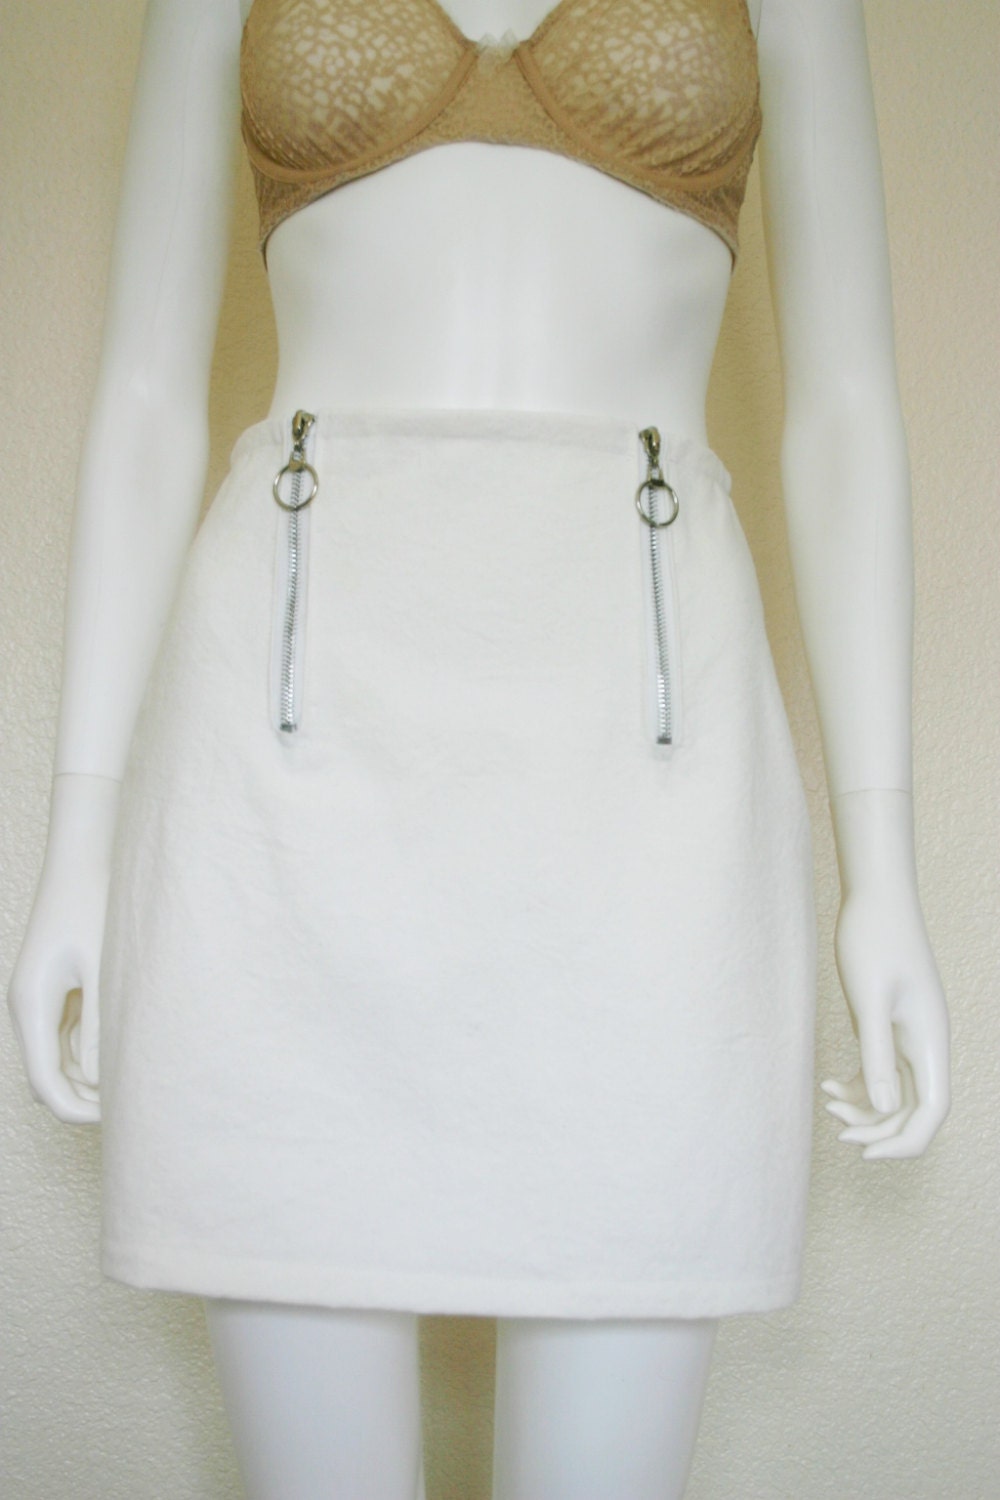 Exposed White Double zip O Ring Skirt by DEEEPWATERVINTAGE